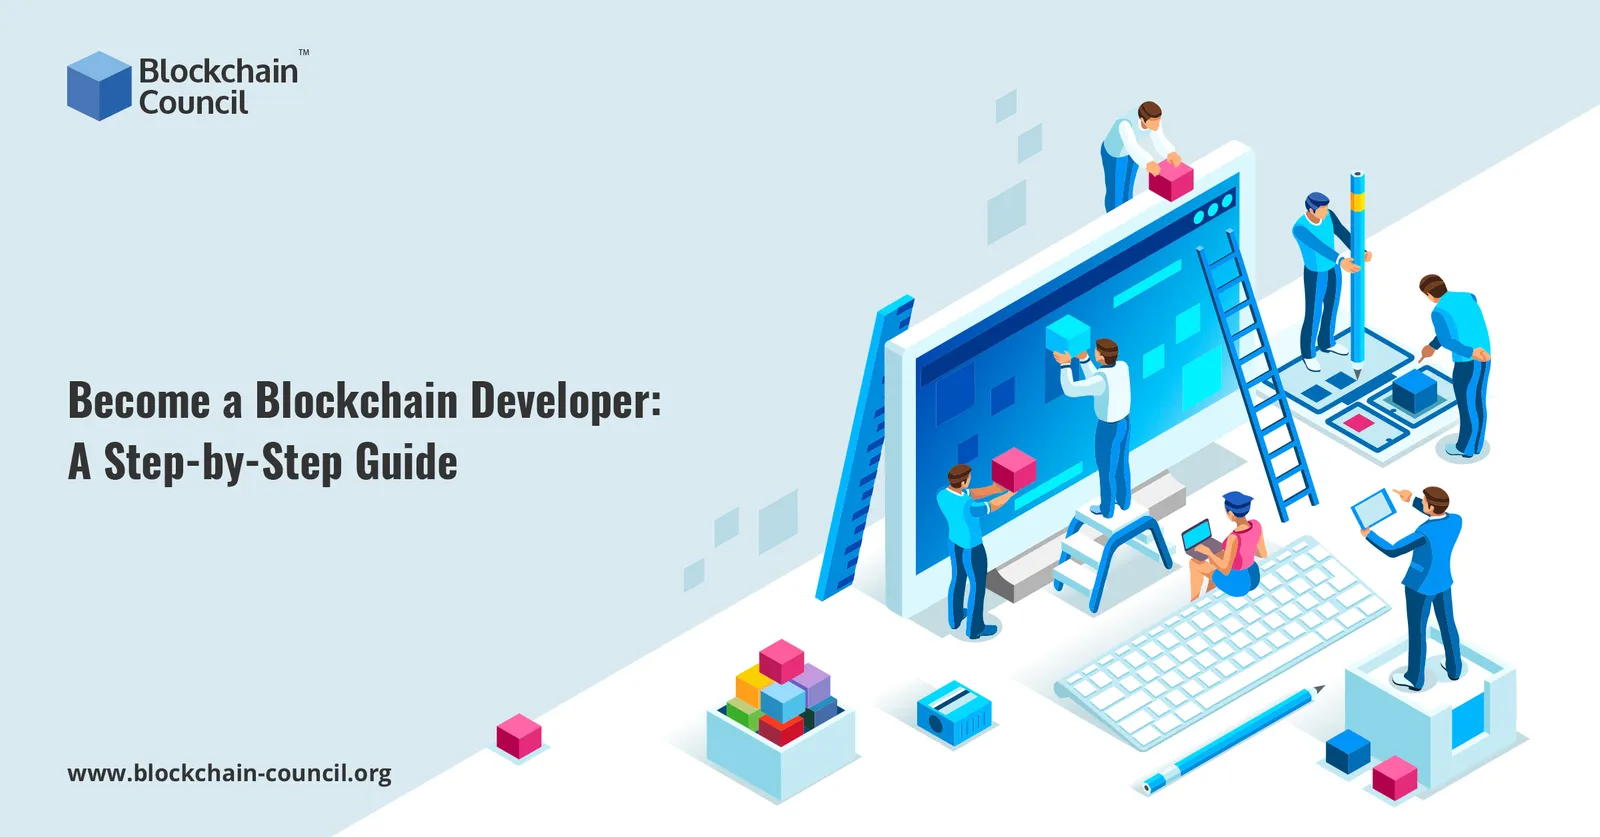 A Step-by-Step Guide to Becoming a Blockchain Developer